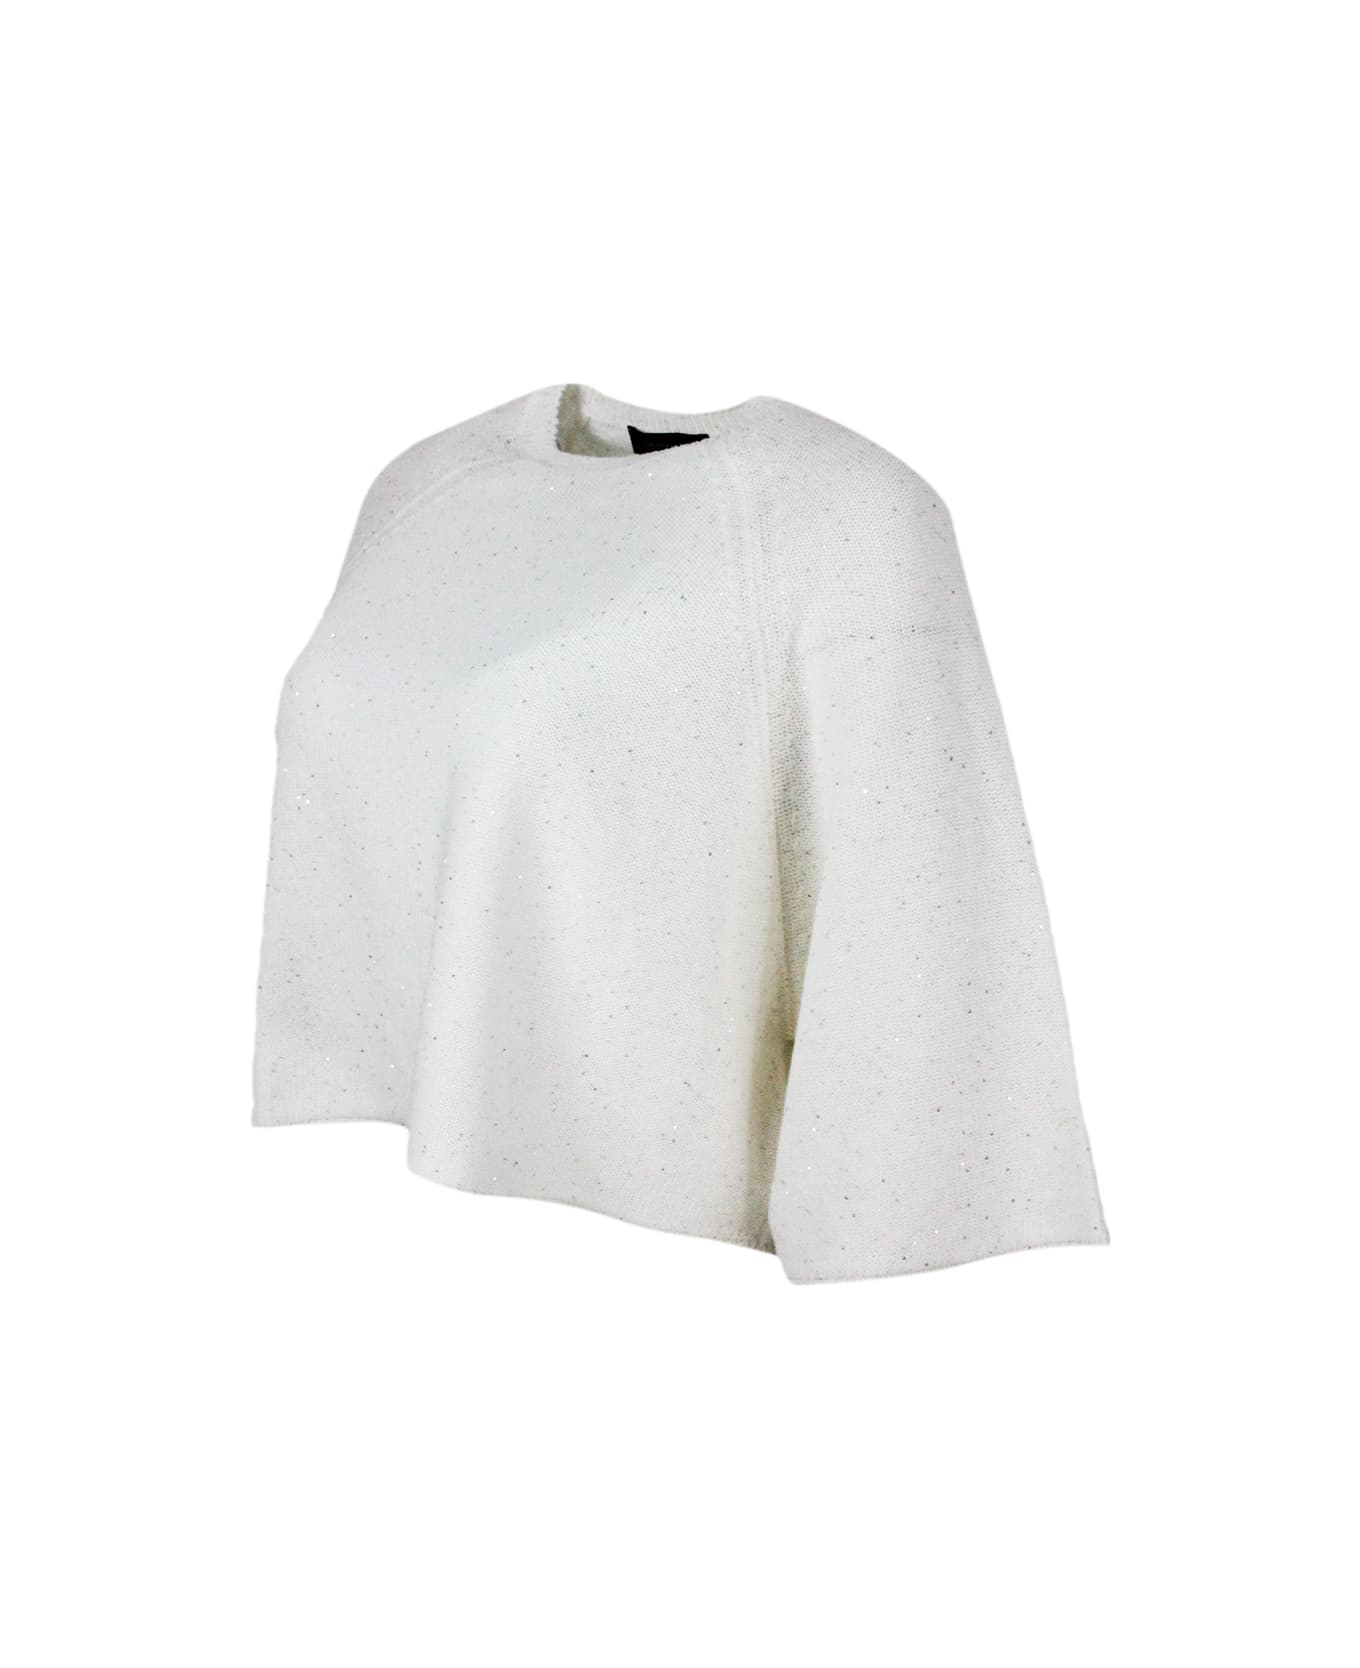 Fabiana Filippi Cape, Crew-neck And Half-sleeved Sweater In Cotton And Linen - Bianco